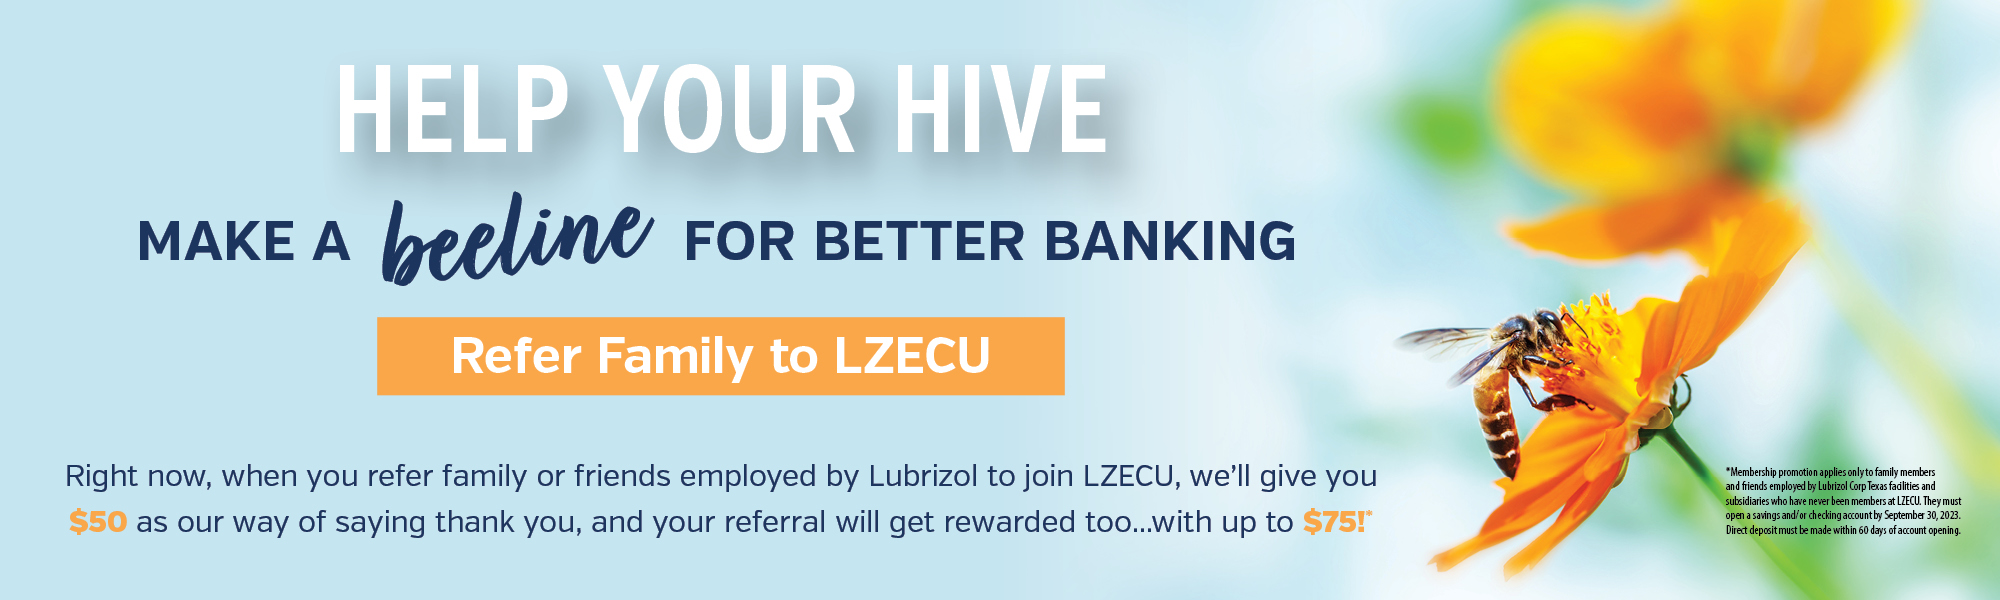 Help your hive by referring family and Lubrizol employees to join the credit union. You earn $50 per referral. New members get up to $75. Click to learn more.